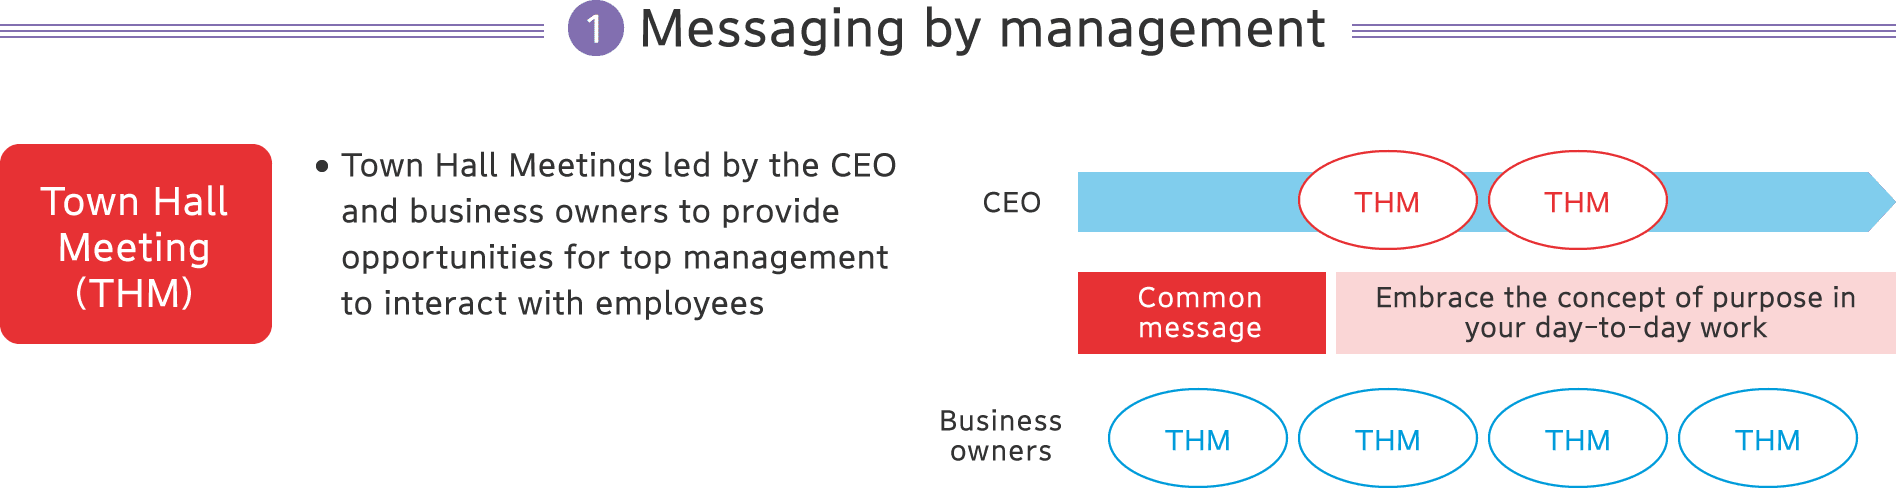 【1】Messaging by management